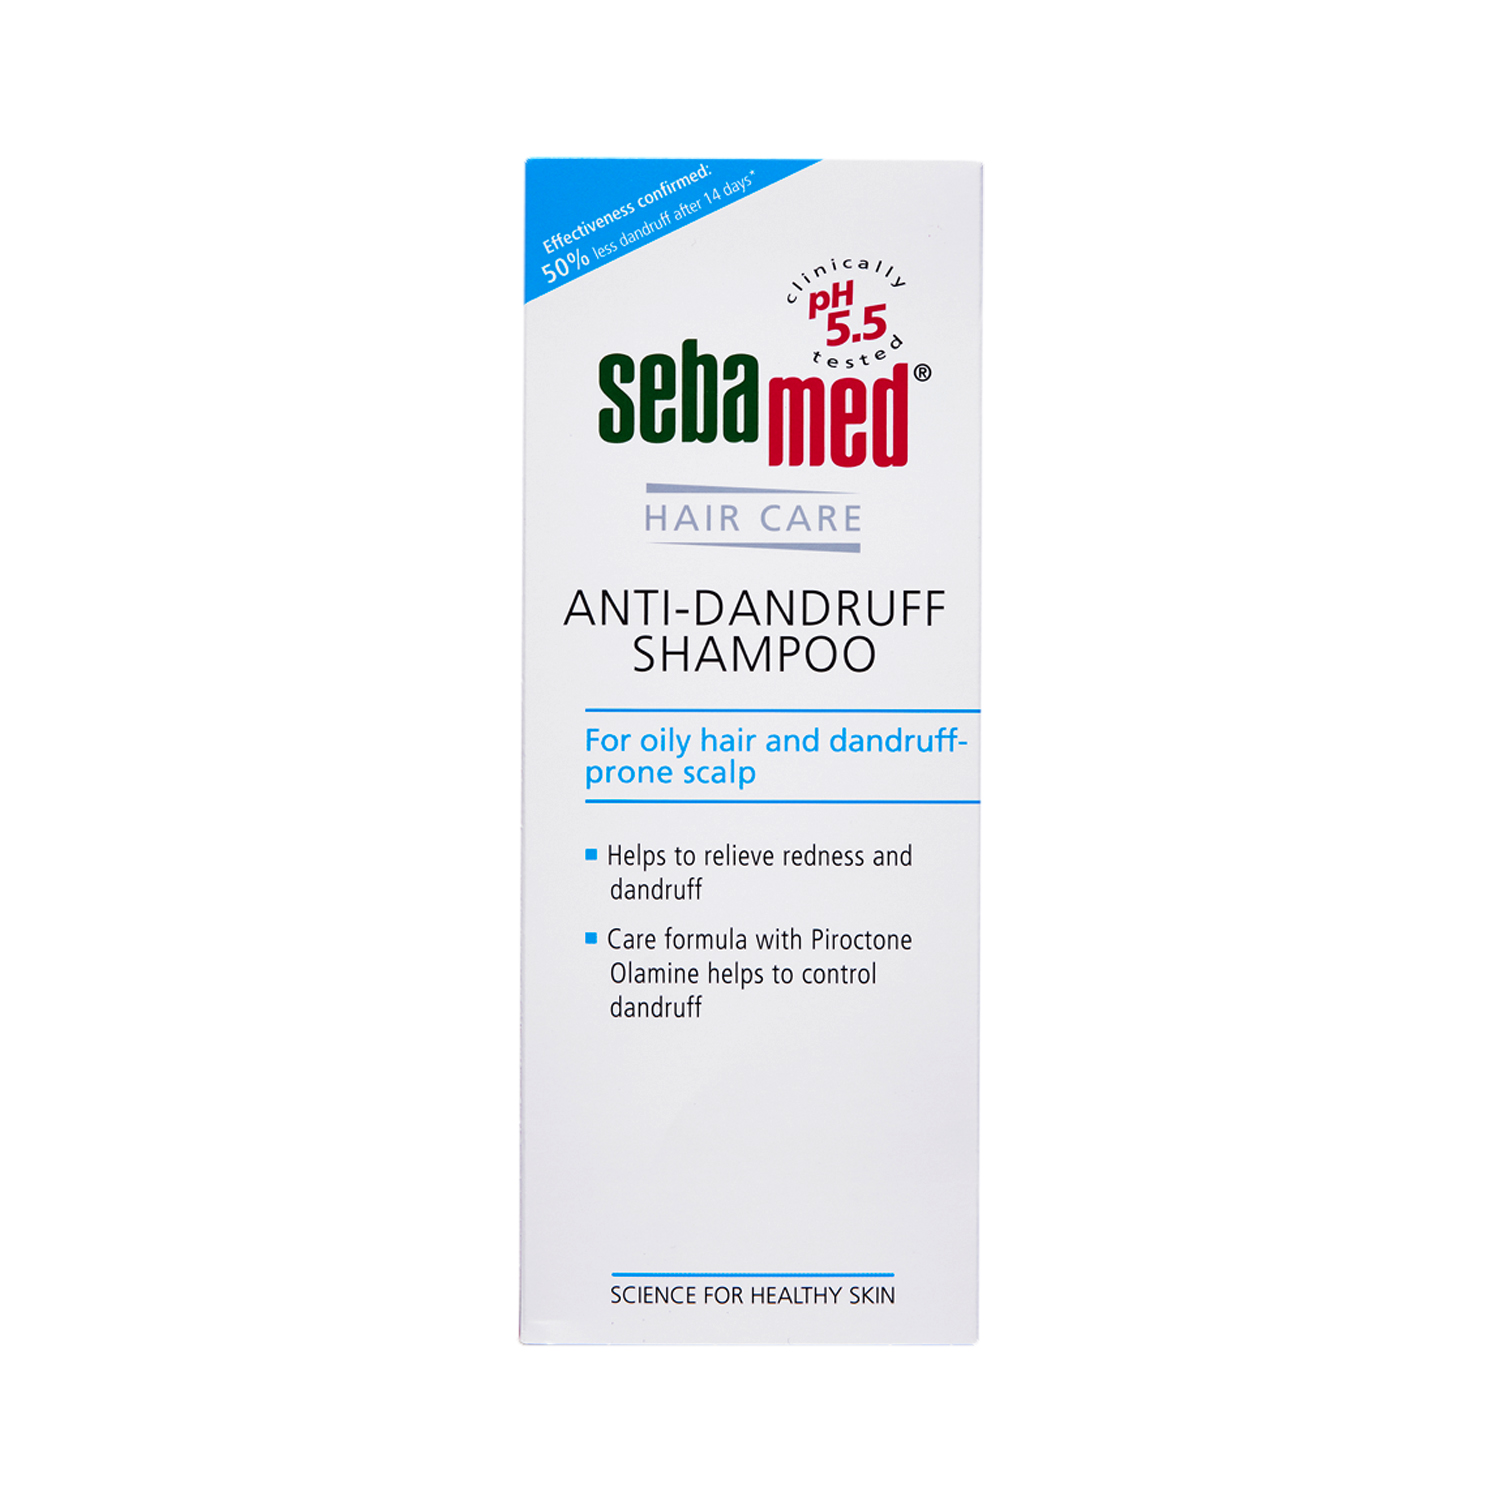 Sebamed Anti Dandruff Shampoo for Men and Women ₹496 at low prices online Cureka